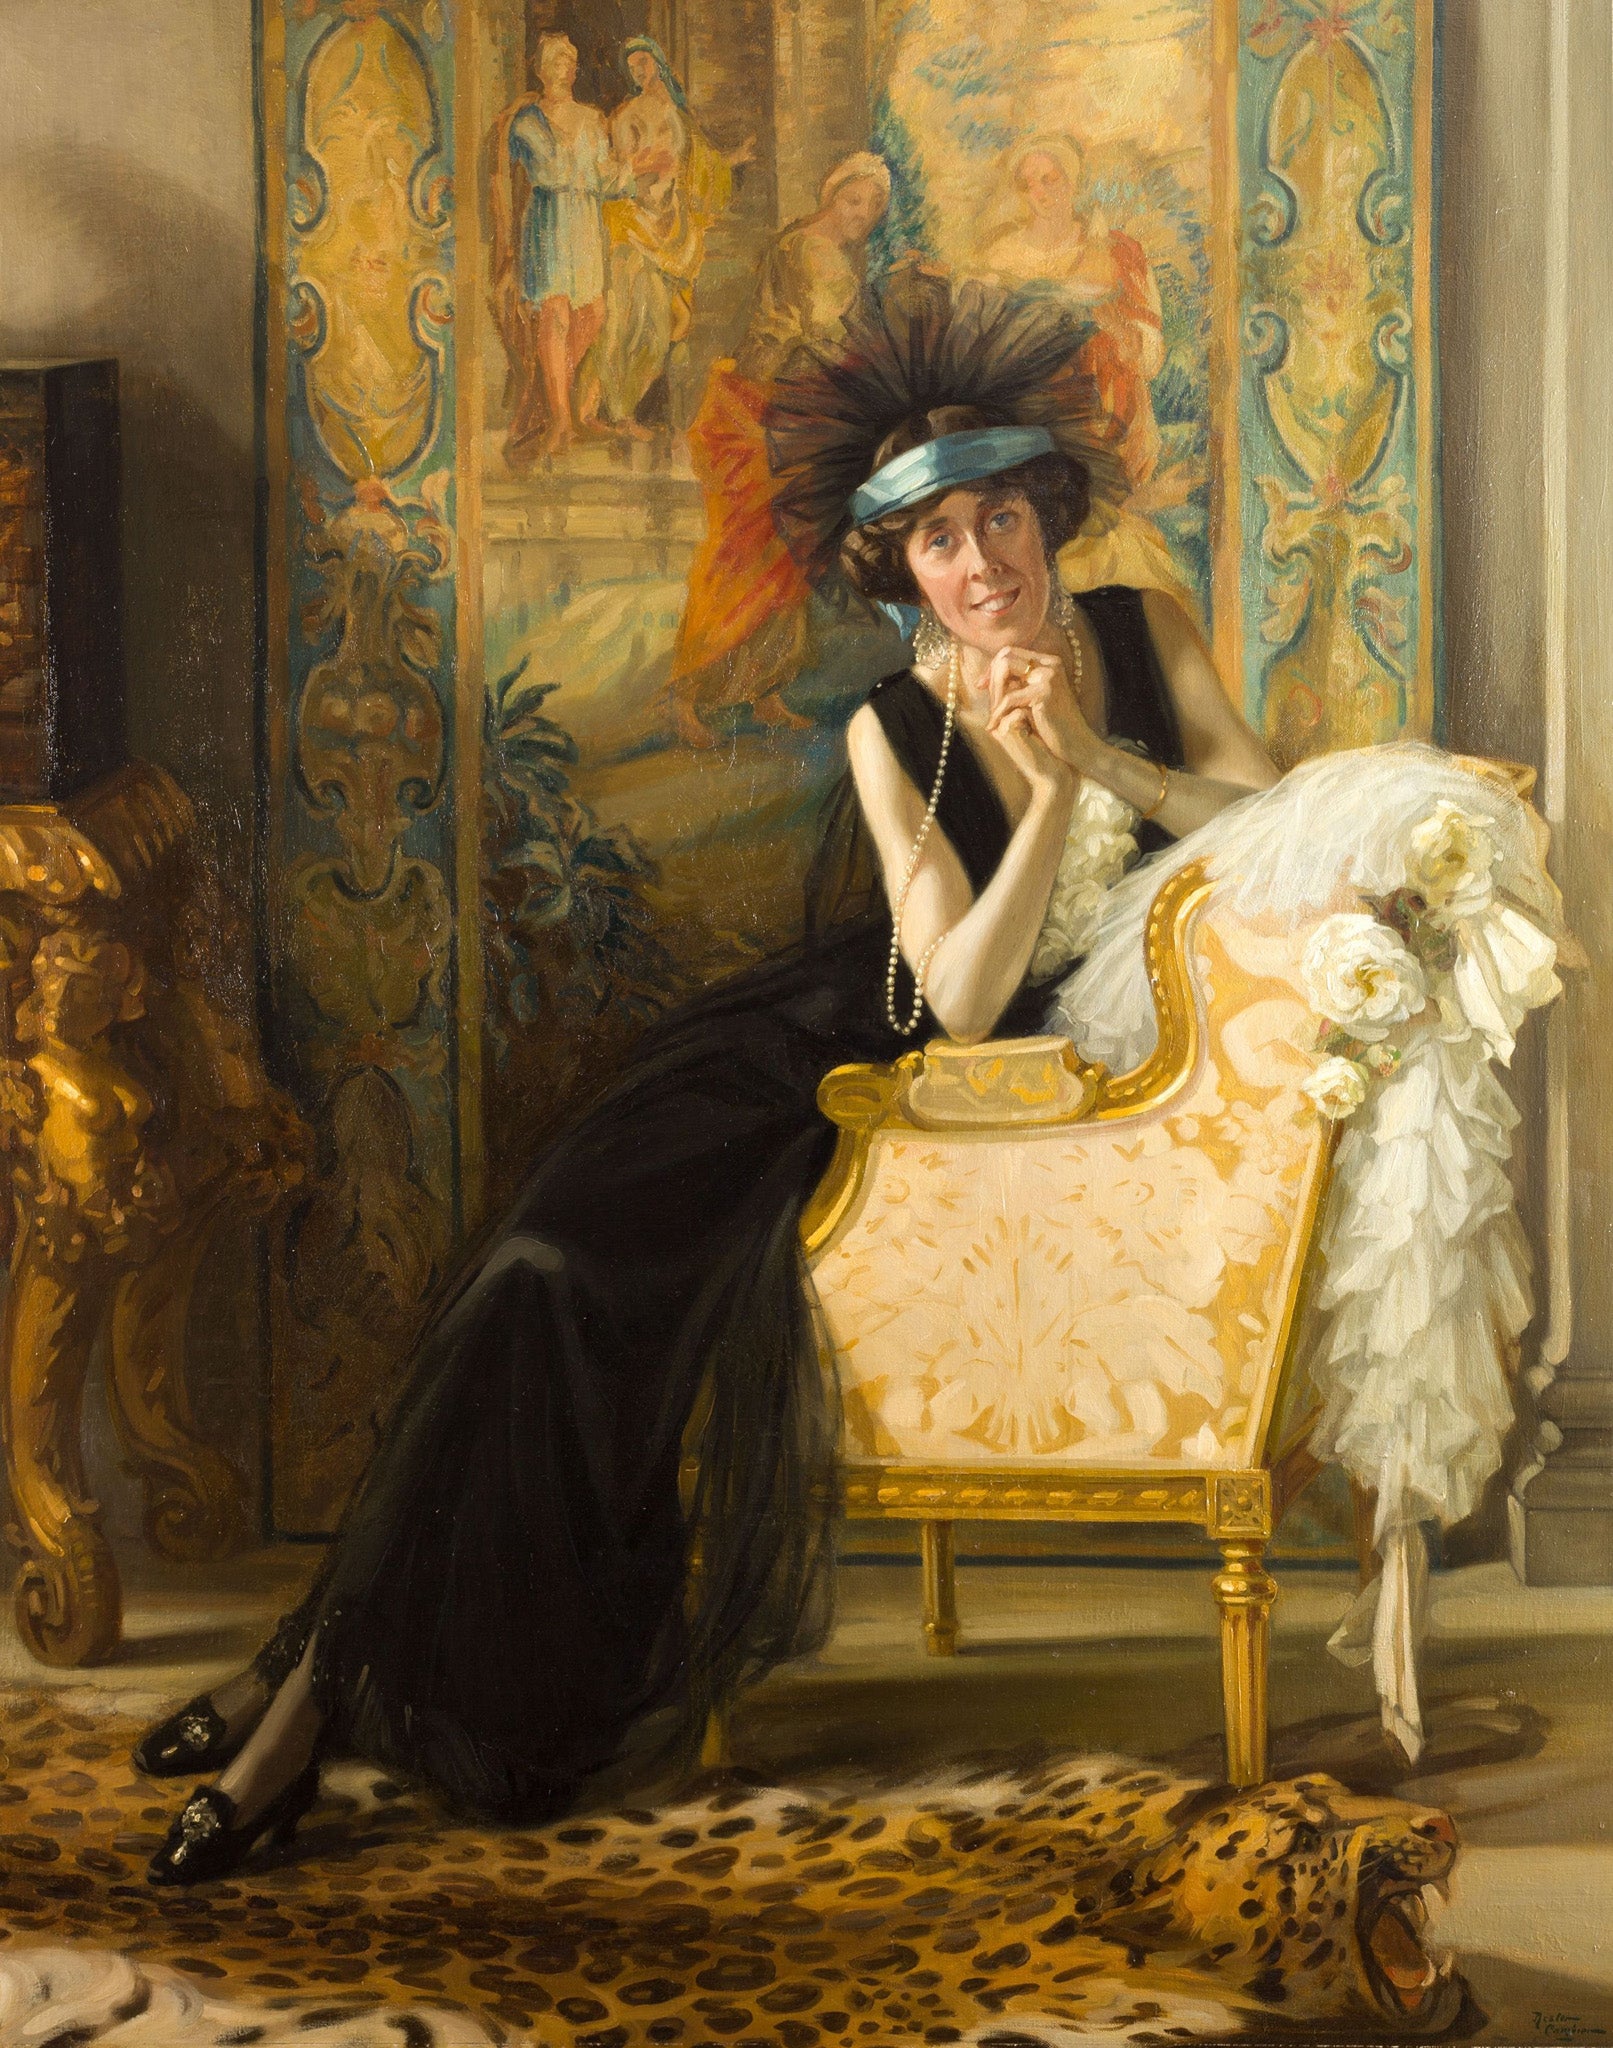 Nestor Cambier (1879 - 1957), 'Portrait of Lady Barber seated by a Leapard-skin Rug', c. 1923